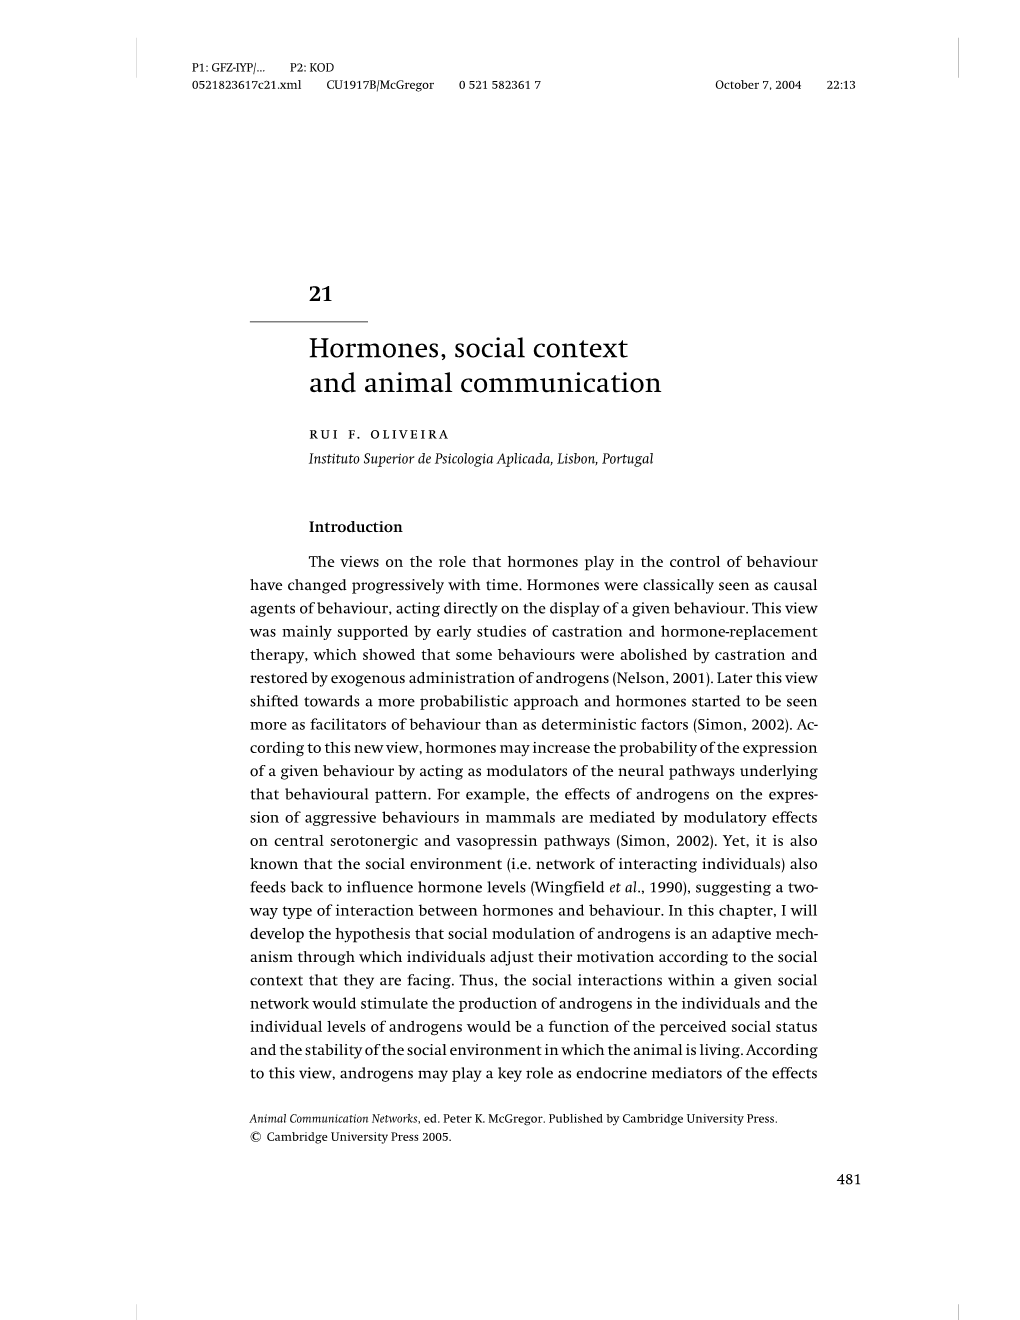 Hormones, Social Context and Animal Communication